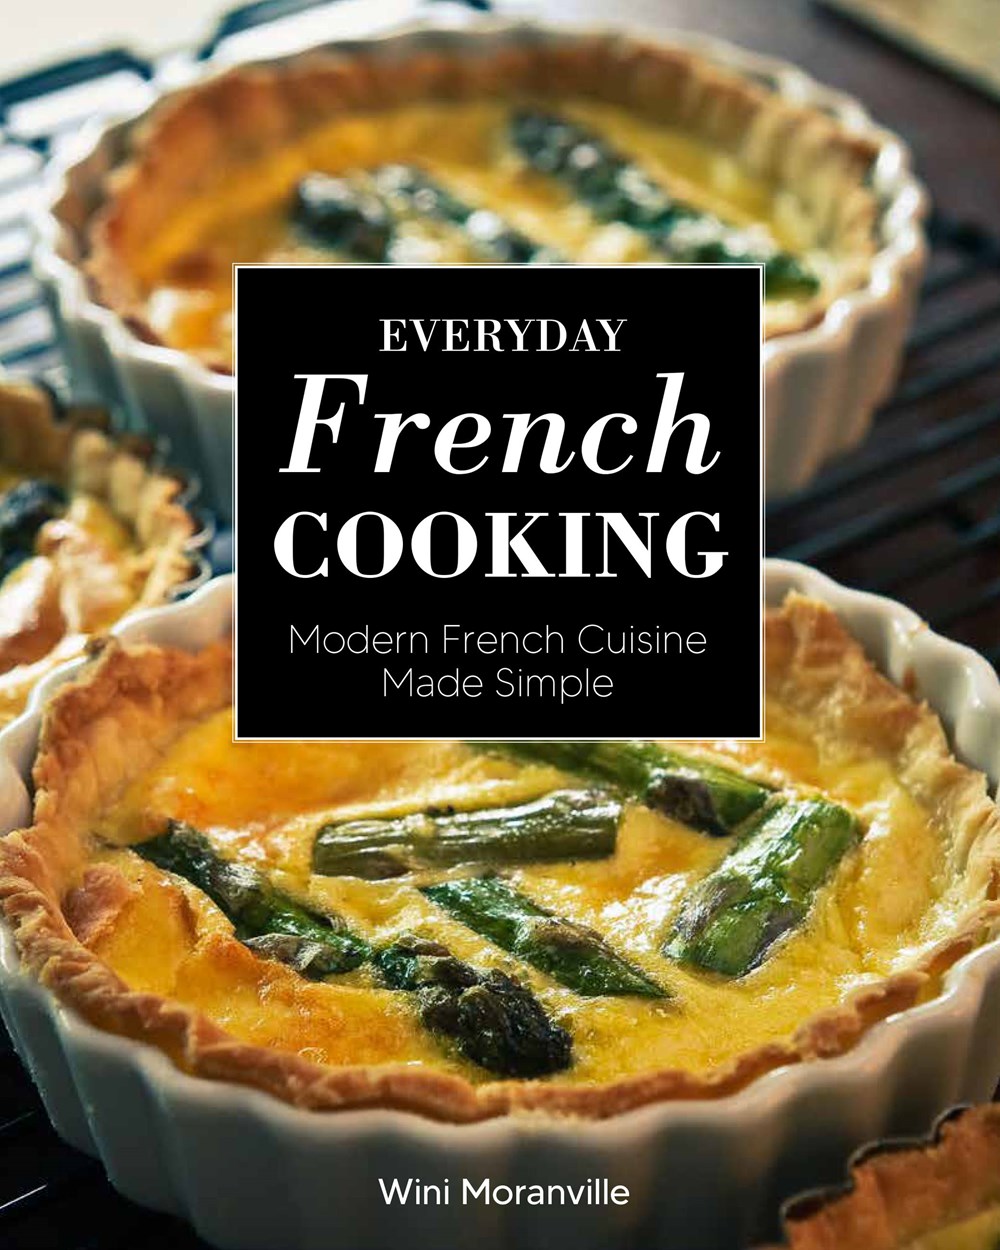 Image of "Everyday French Cooking: Modern French Cuisine Made Simple"